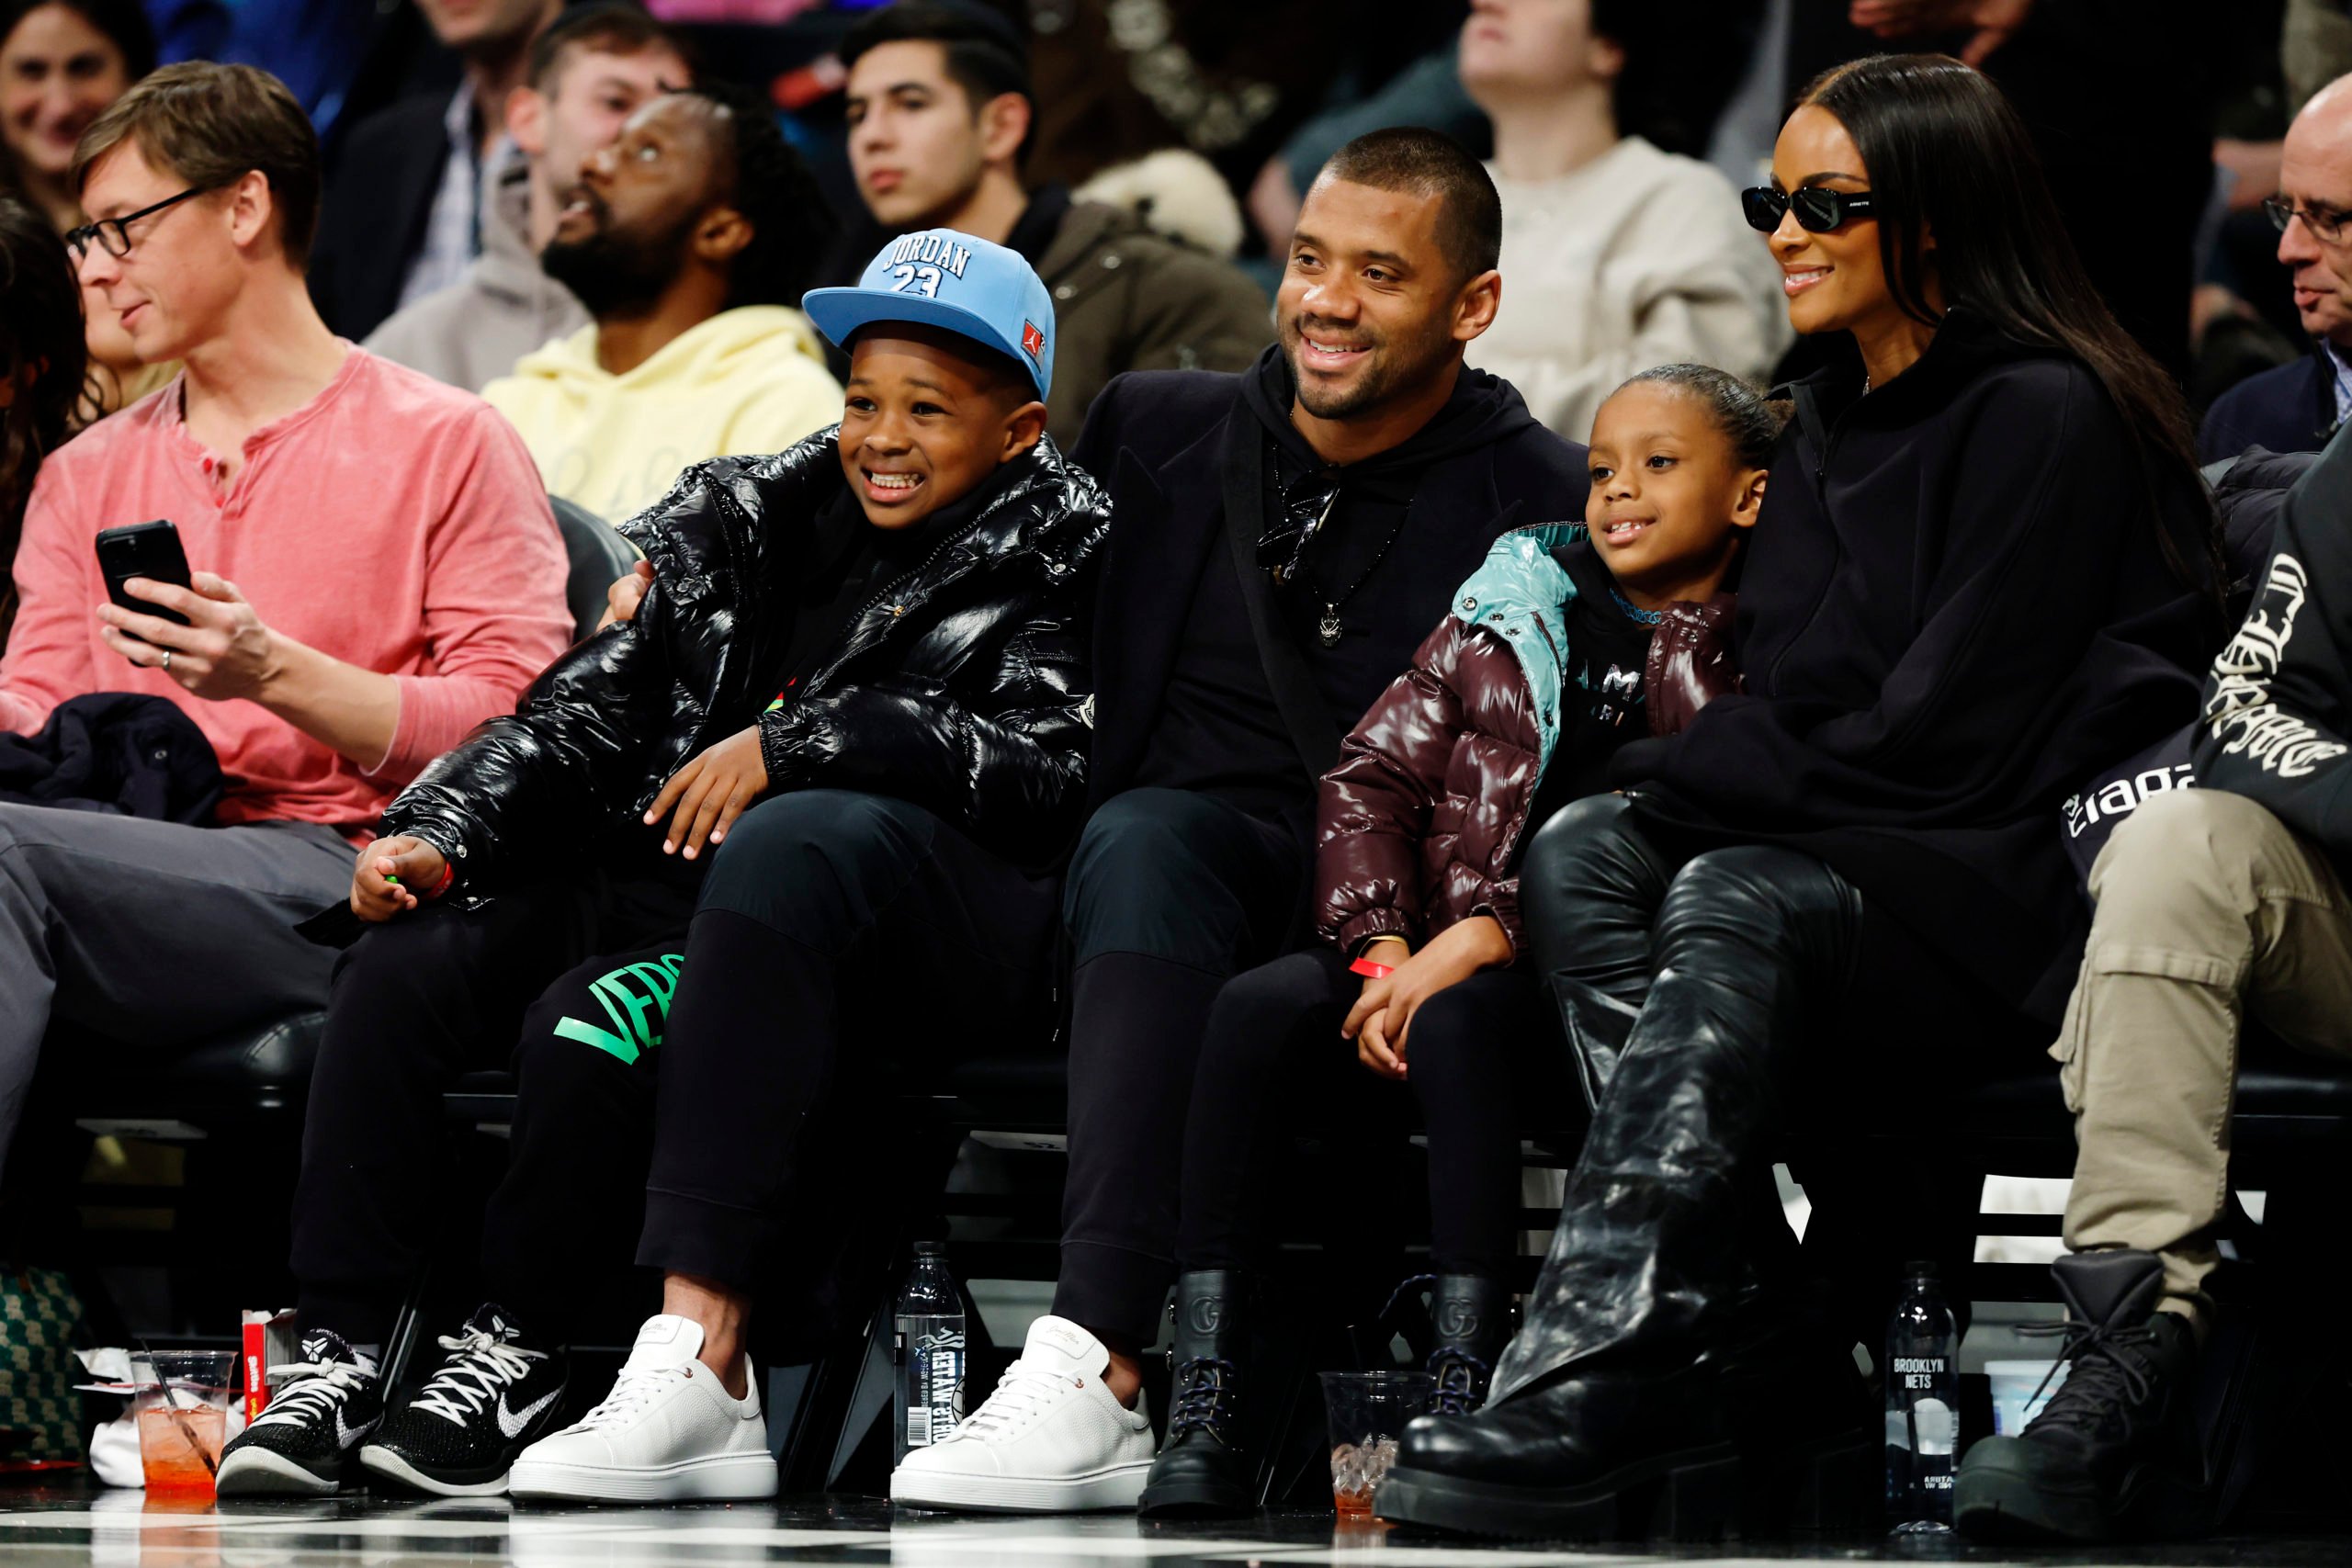 NEW YORK, NEW YORK - FEBRUARY 13: (L-R) Future Zahir Wilburn, American football quarterback Russell Wilson, Sienna Princess Wilson, and singer Ciara attend the game between the Brooklyn Nets and the Boston Celtics at Barclays Center on February 13, 2024 in the Brooklyn borough of New York City. Sarah Stier/Getty Images